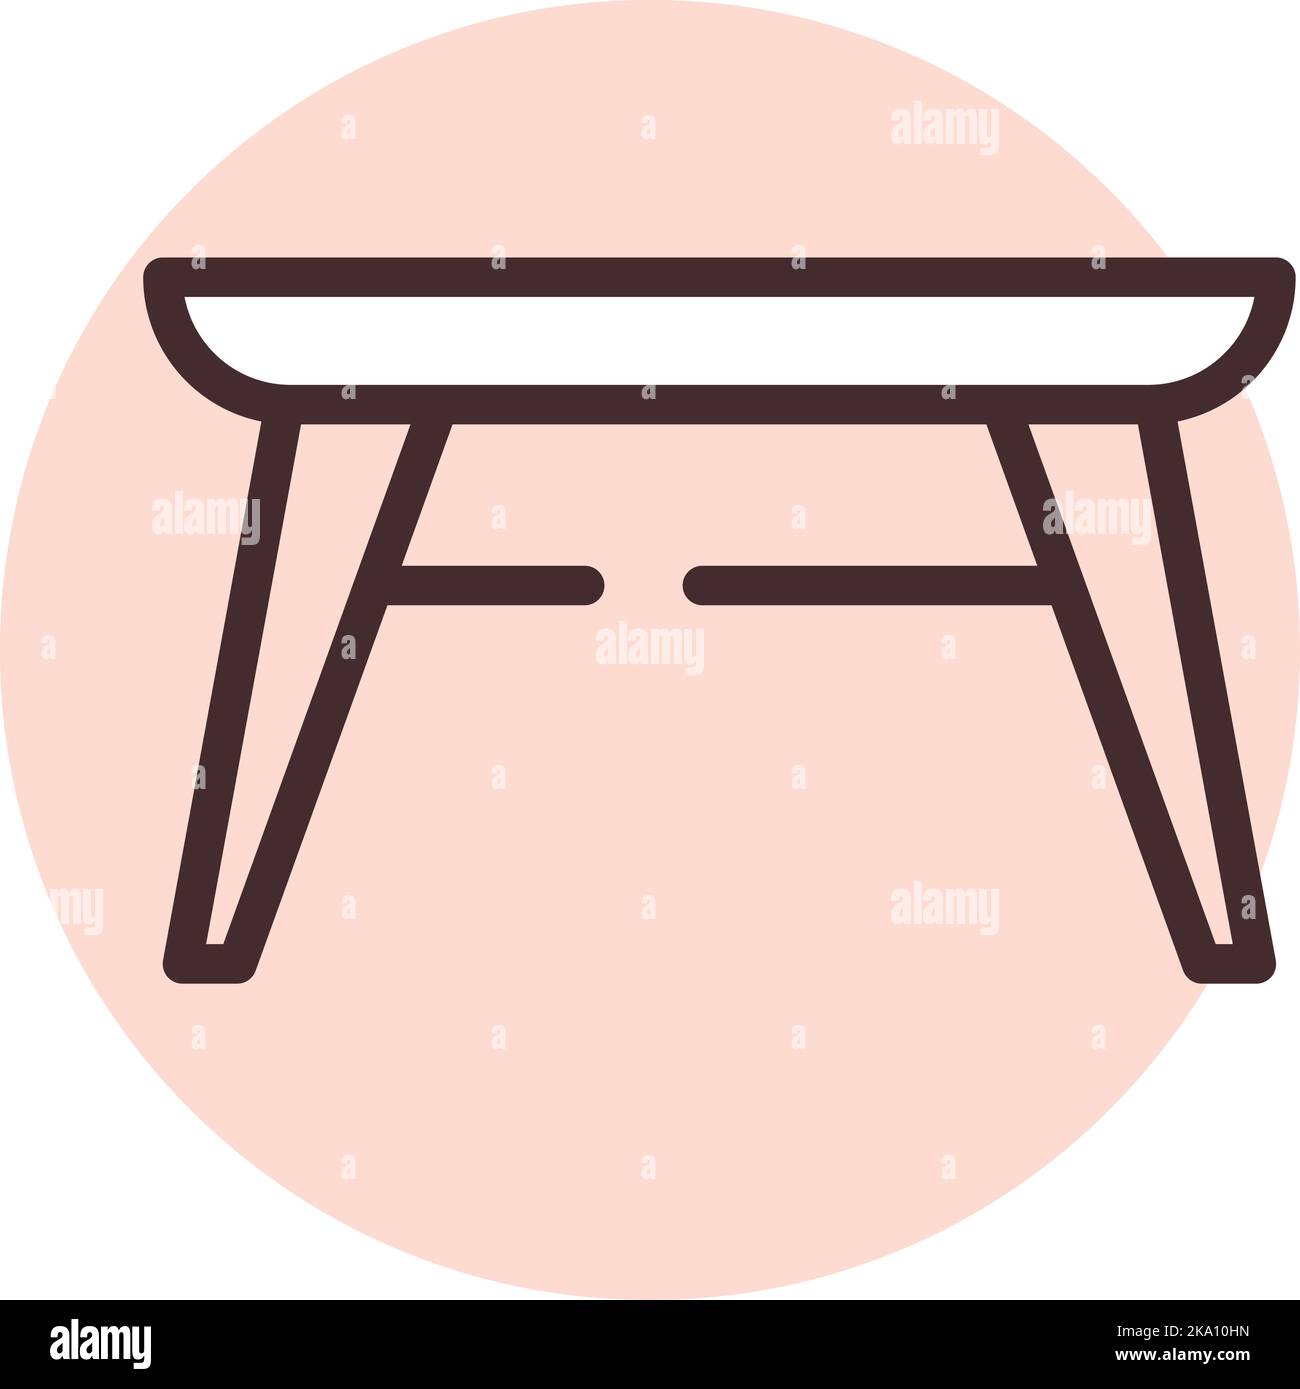 Furniture table, illustration or icon, vector on white background. Stock Vector